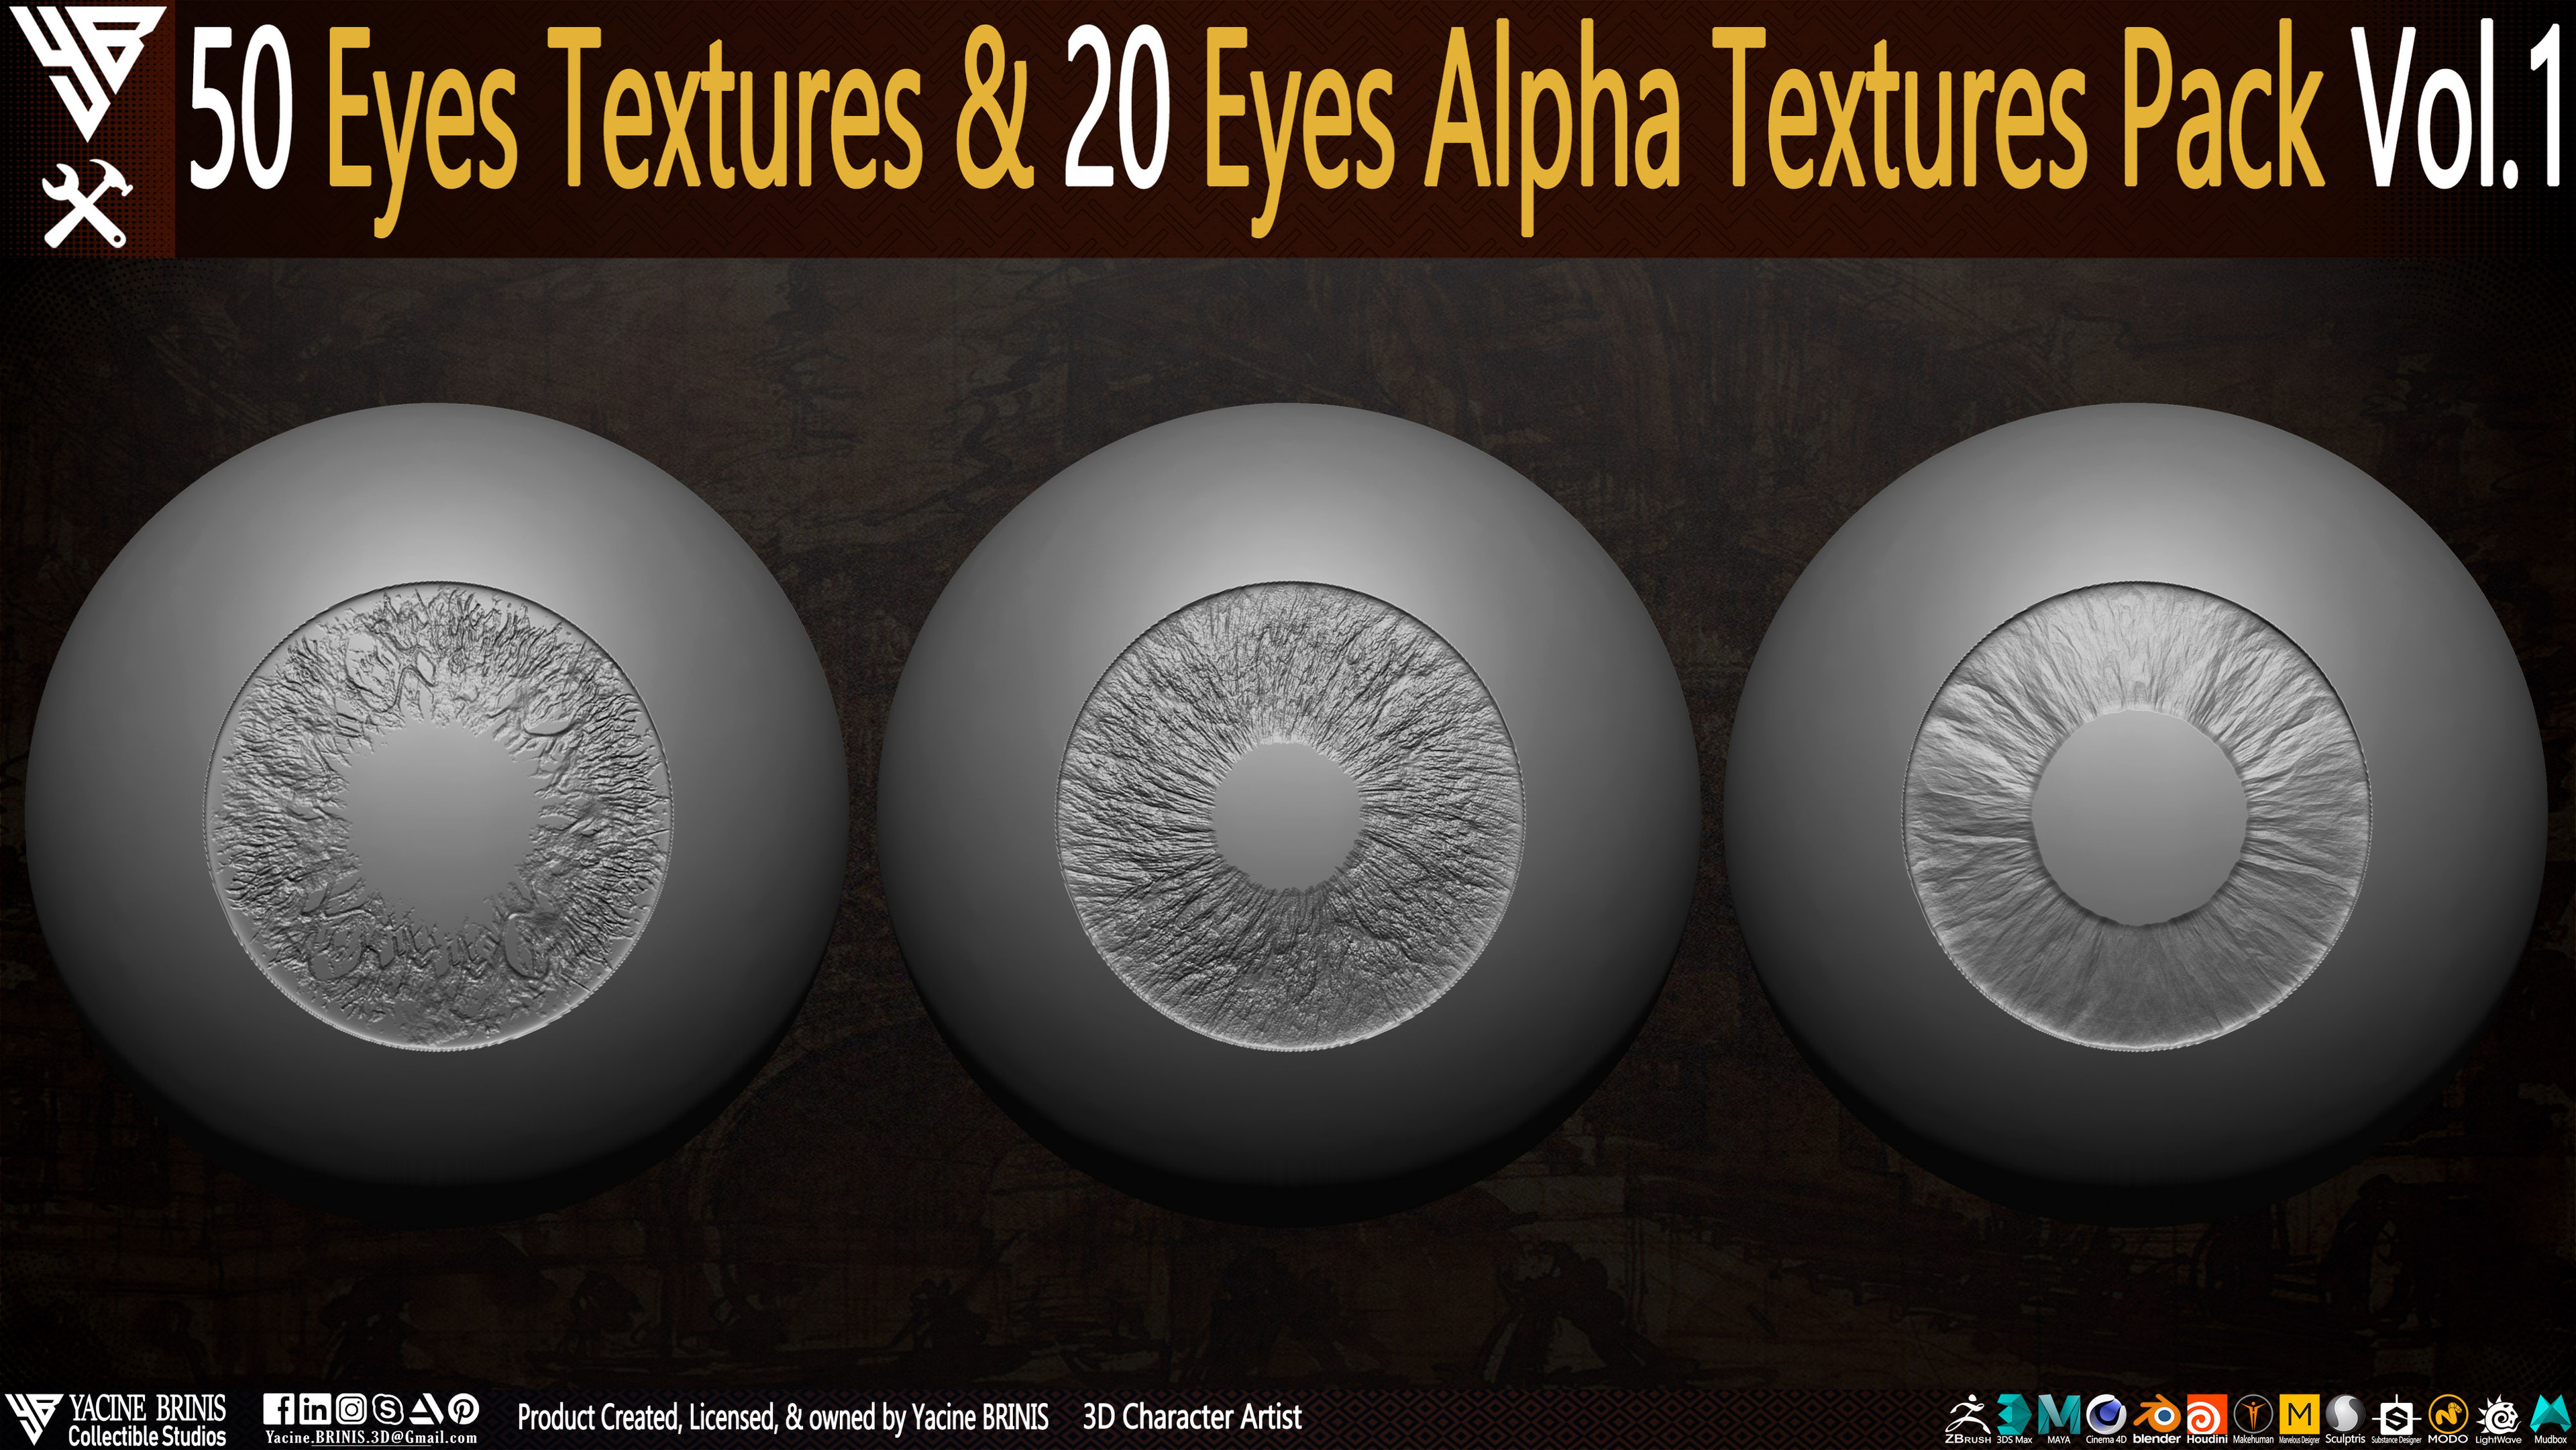 50 Eyes Textures and 20 Eyes Alpha Textures Pack Vol 01 sculpted by Yacine BRINIS Set 05